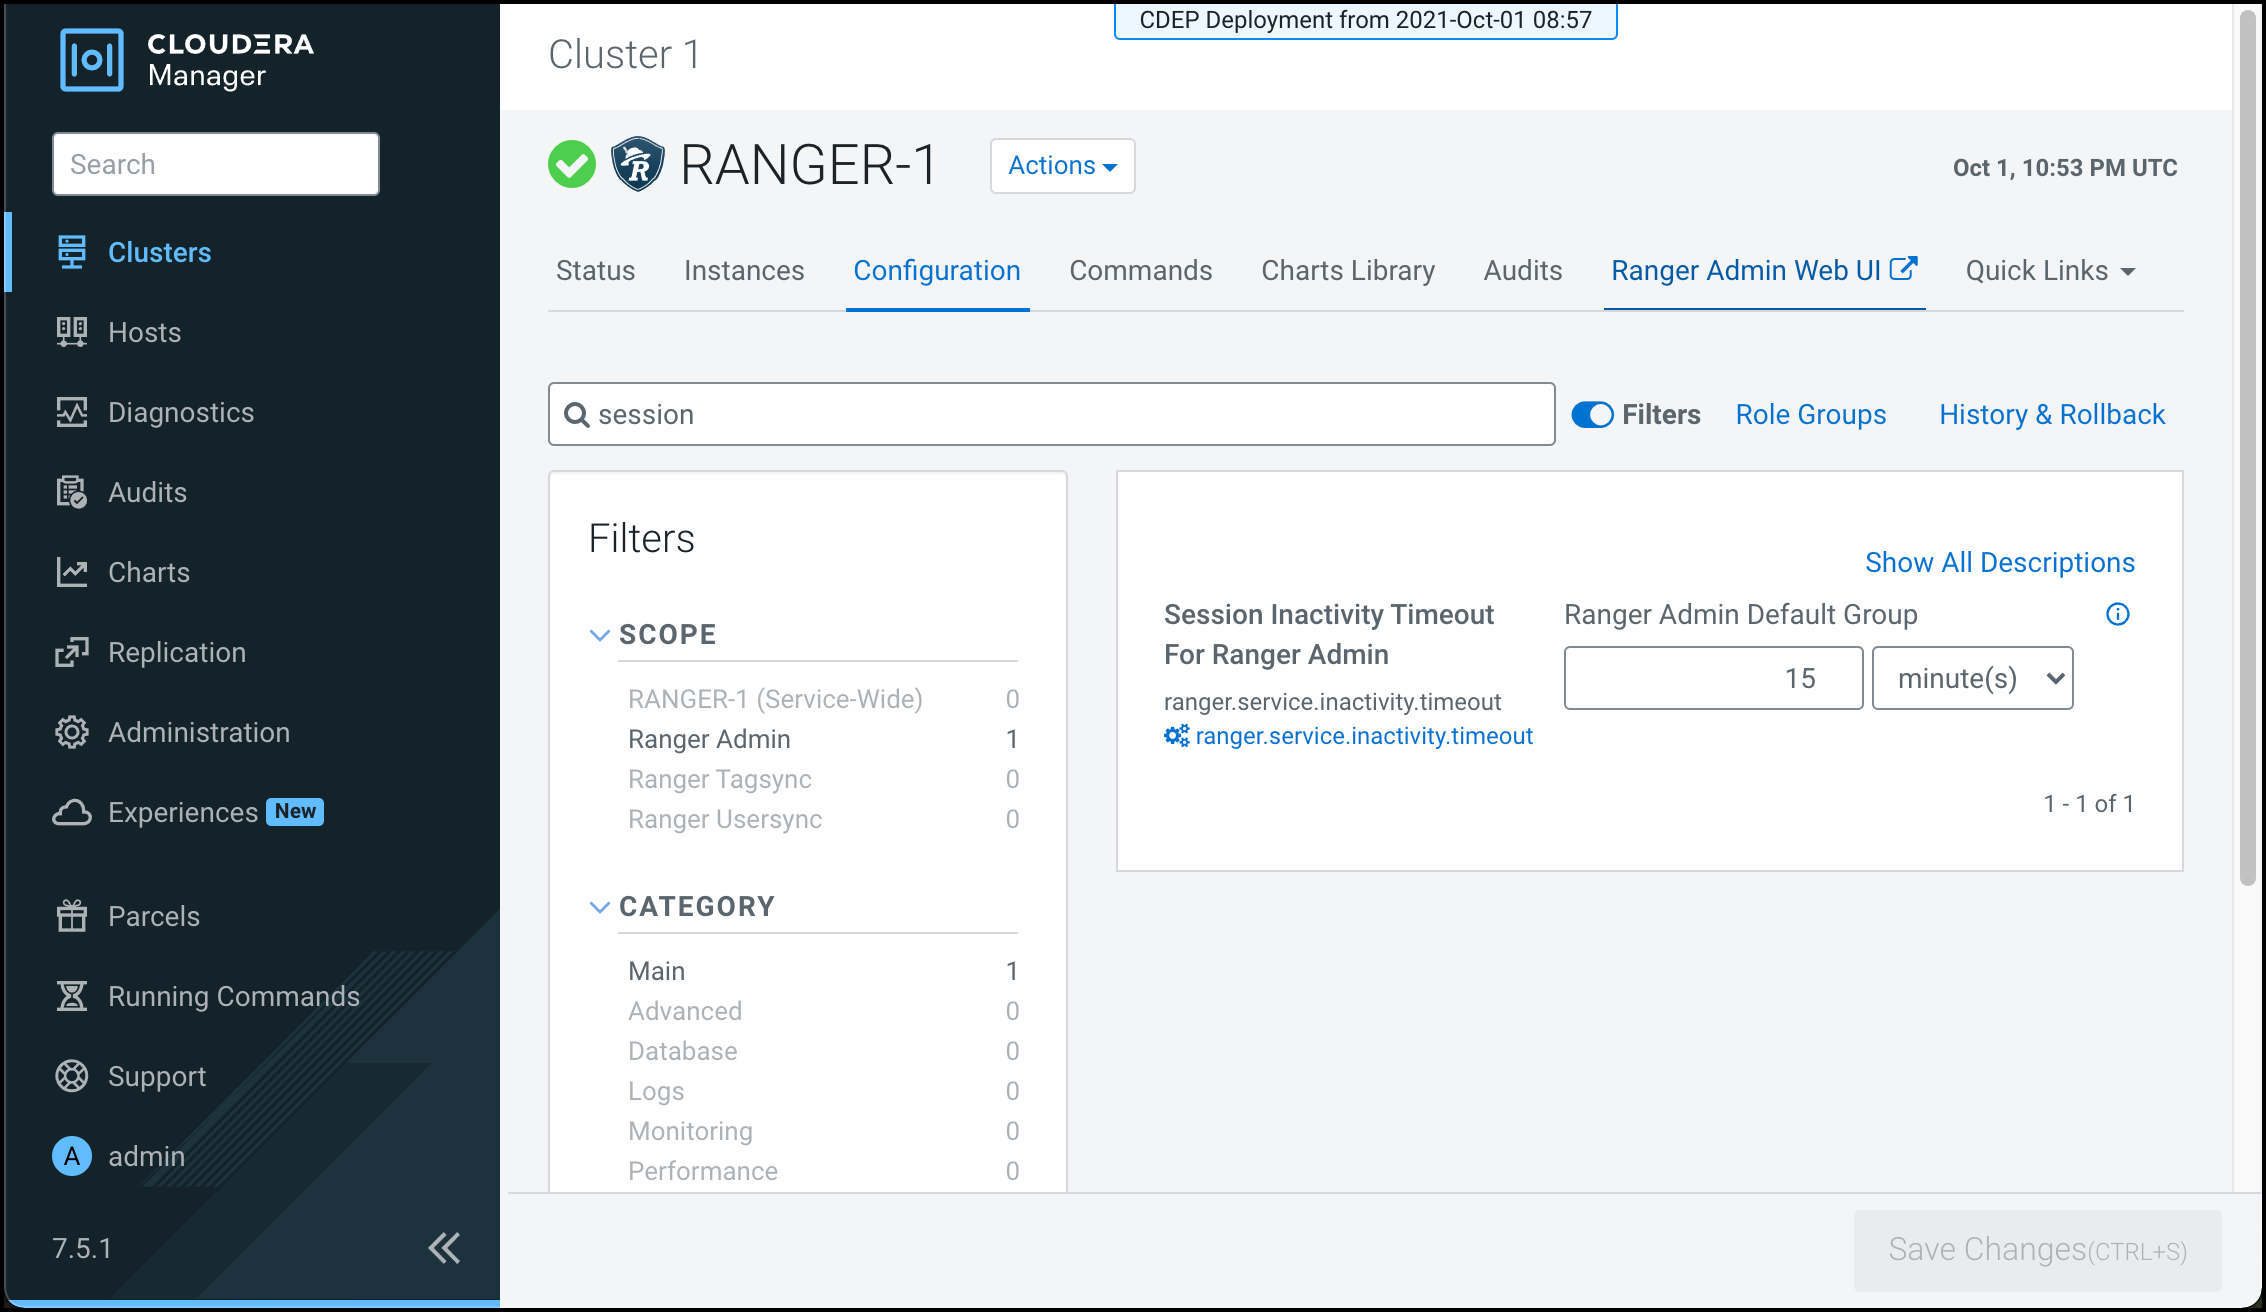 Configuring Ranger Admin Session Inactivity Timeout